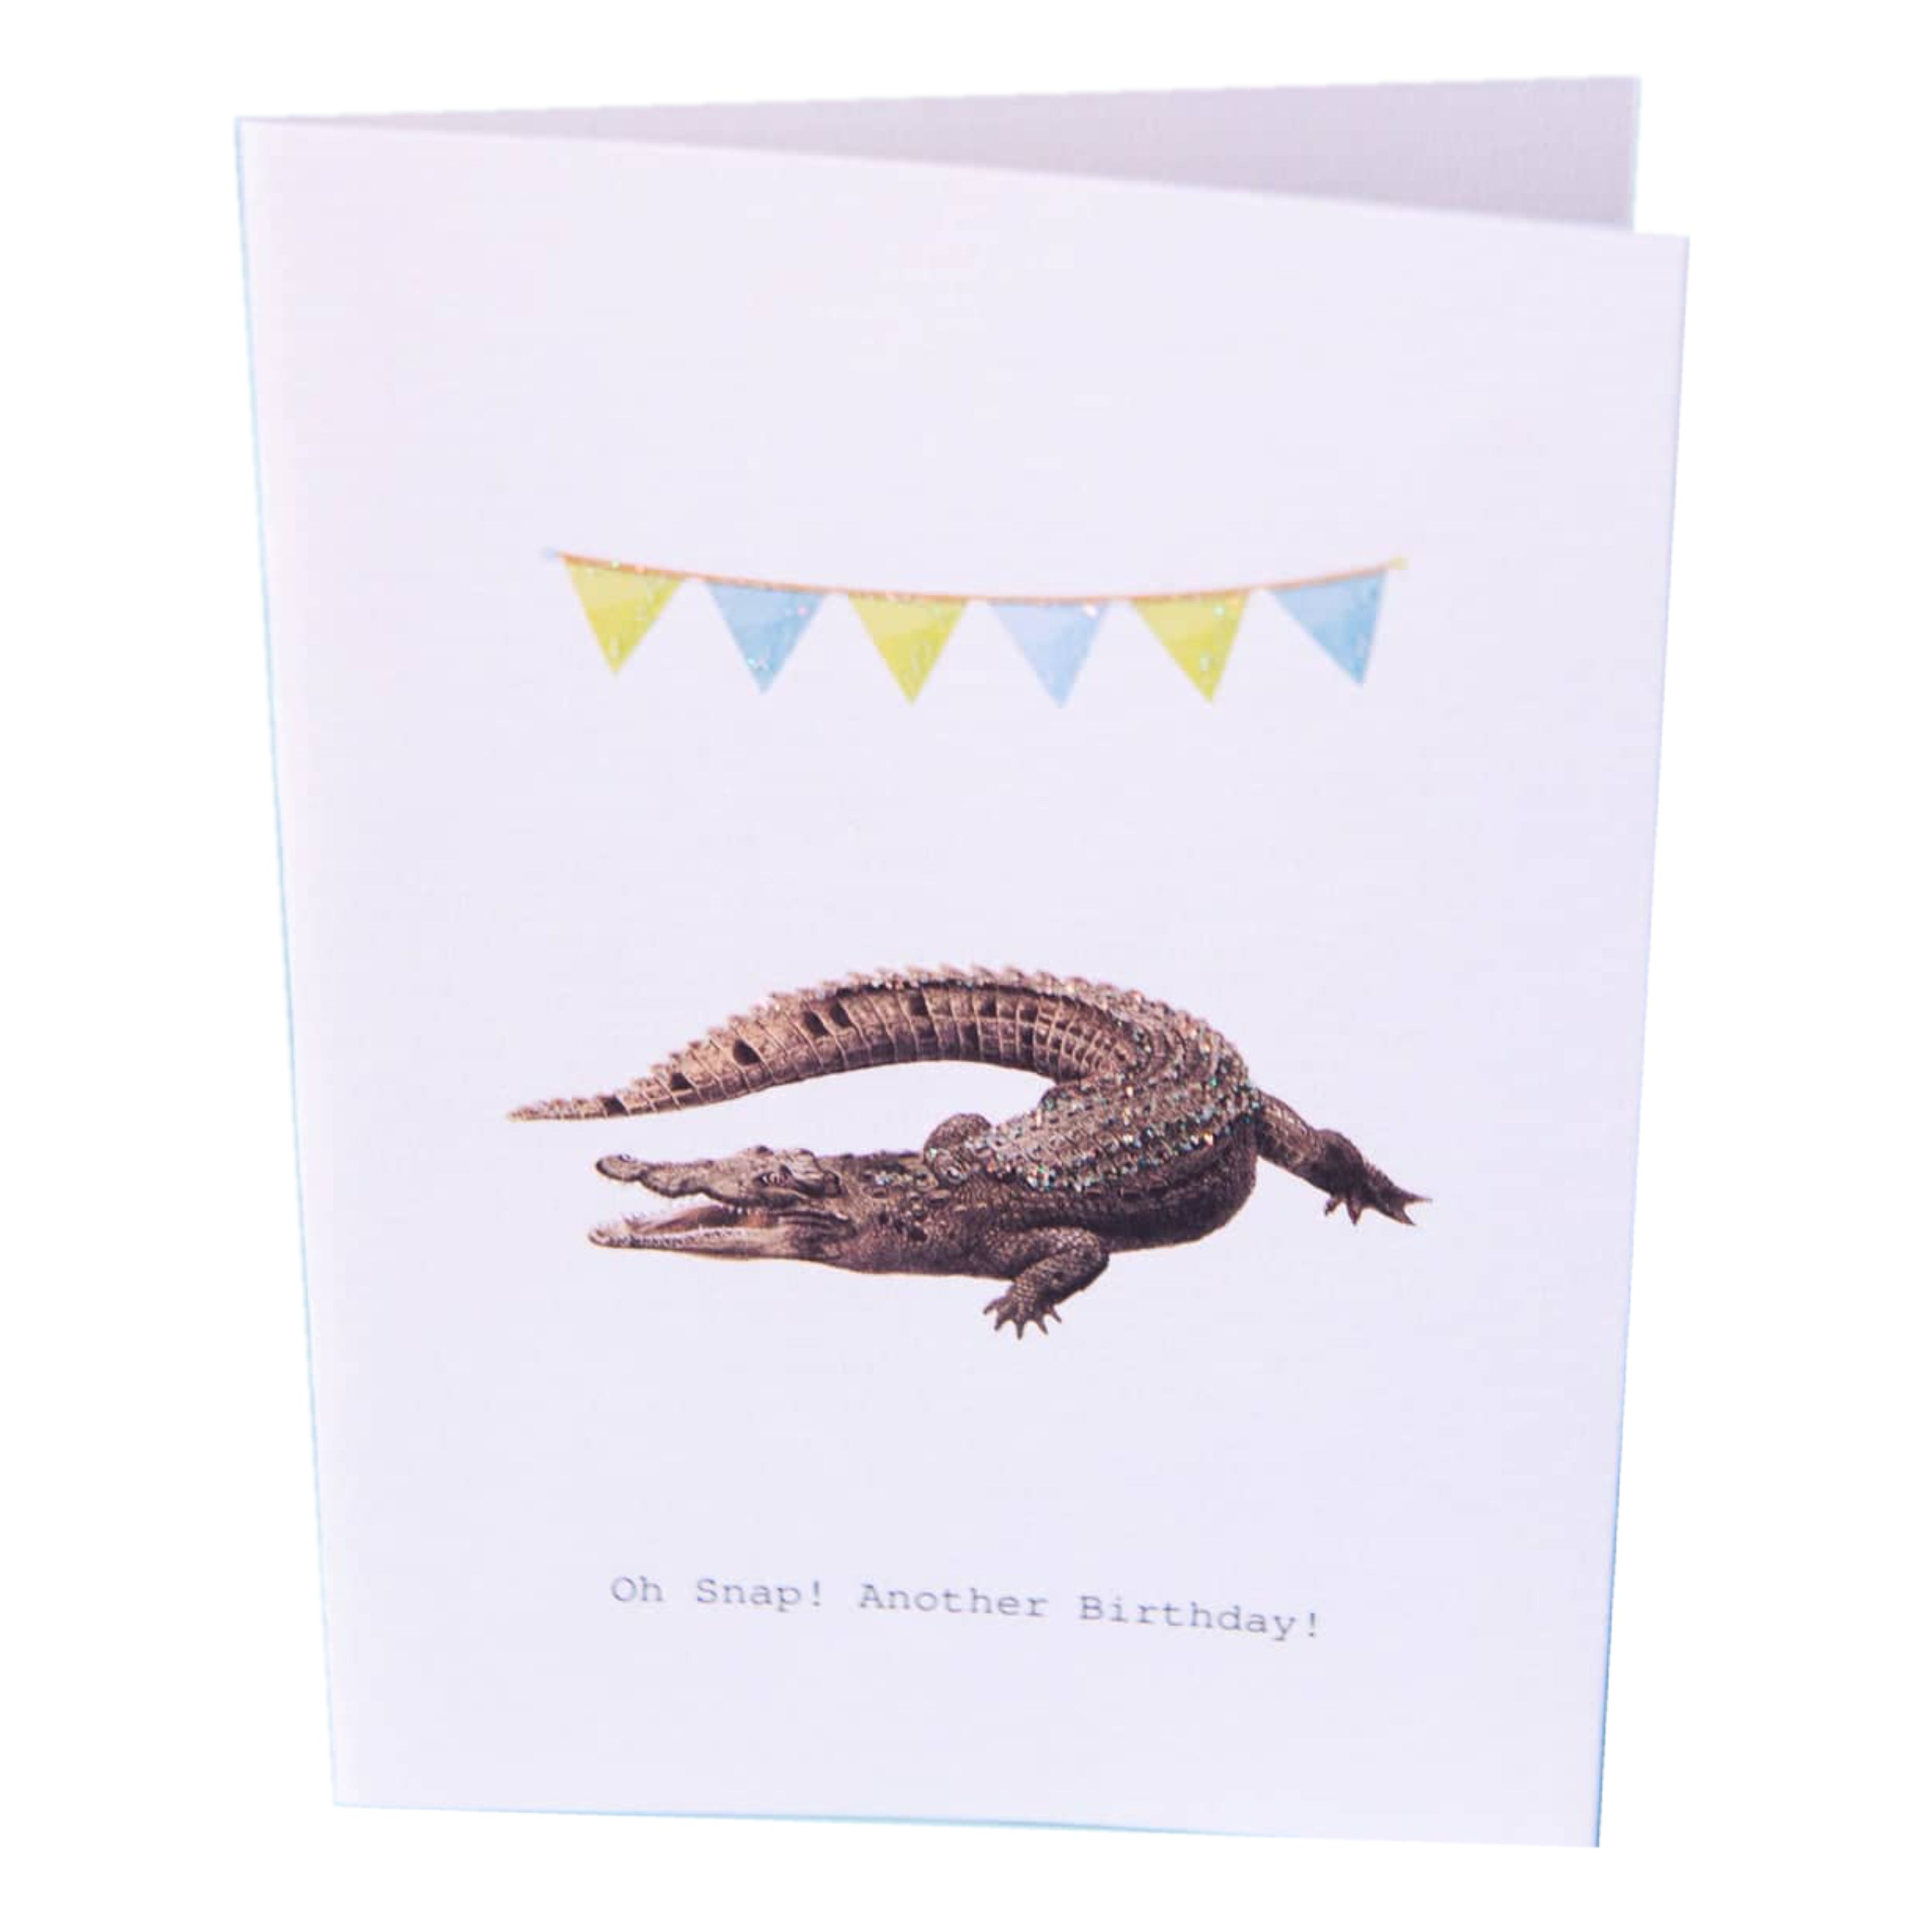 Oh Snap! Another Birthday! Glitter Greeting Card – 3.5" x 5"